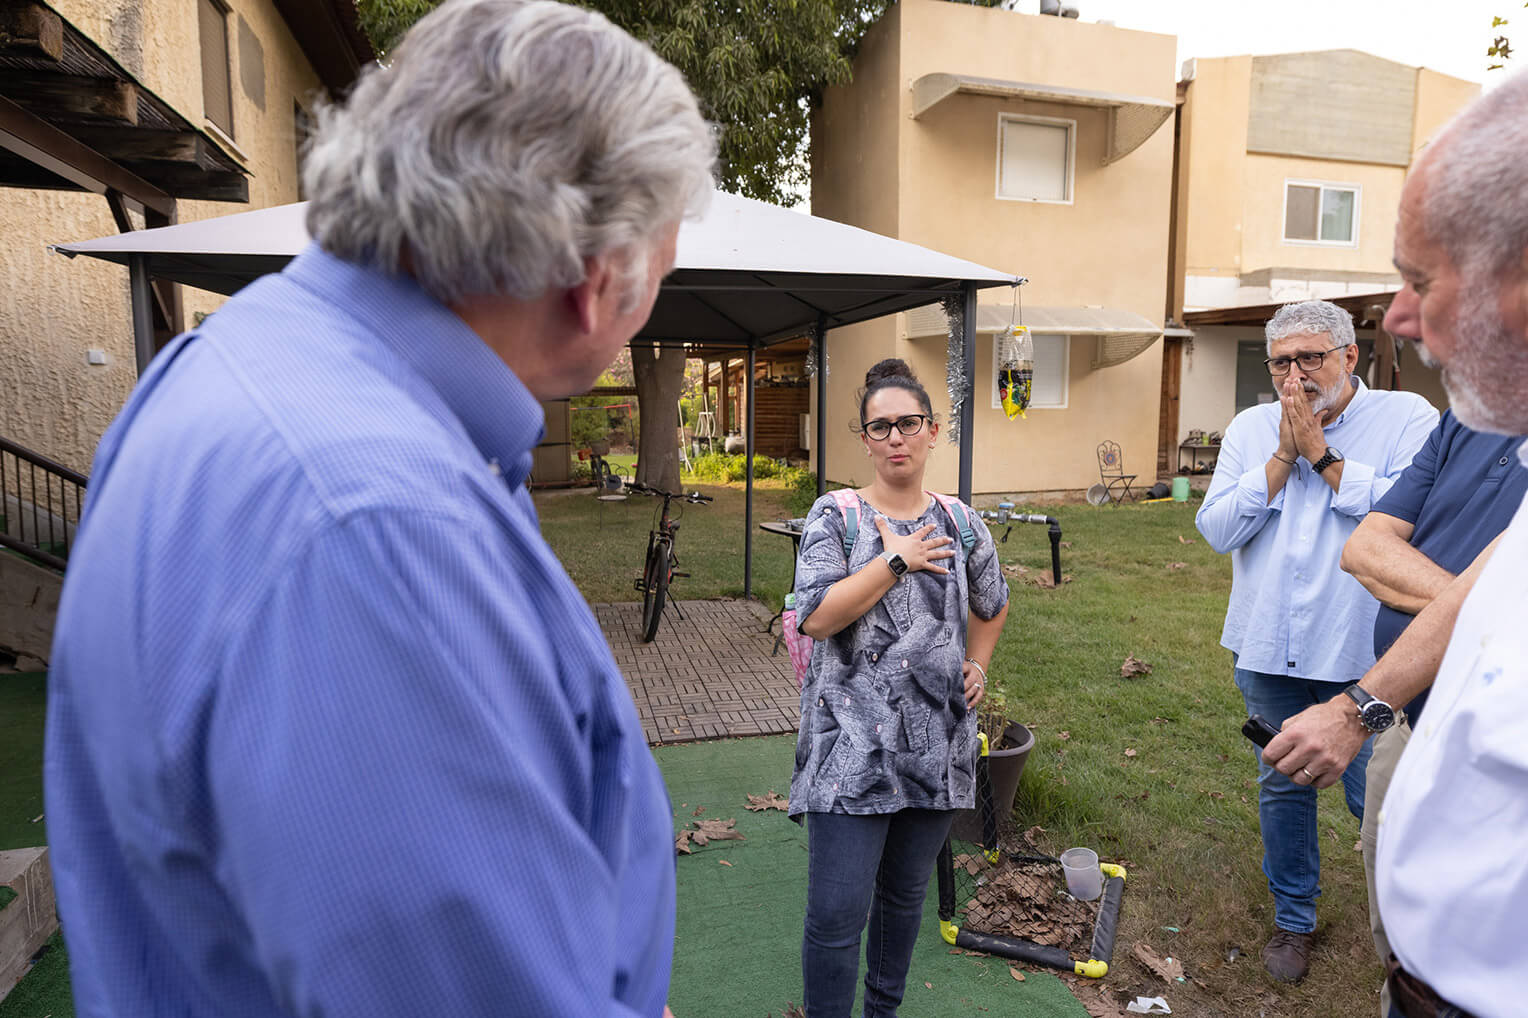 Franklin Graham met with a widow whose husband was killed by terrorists in October.